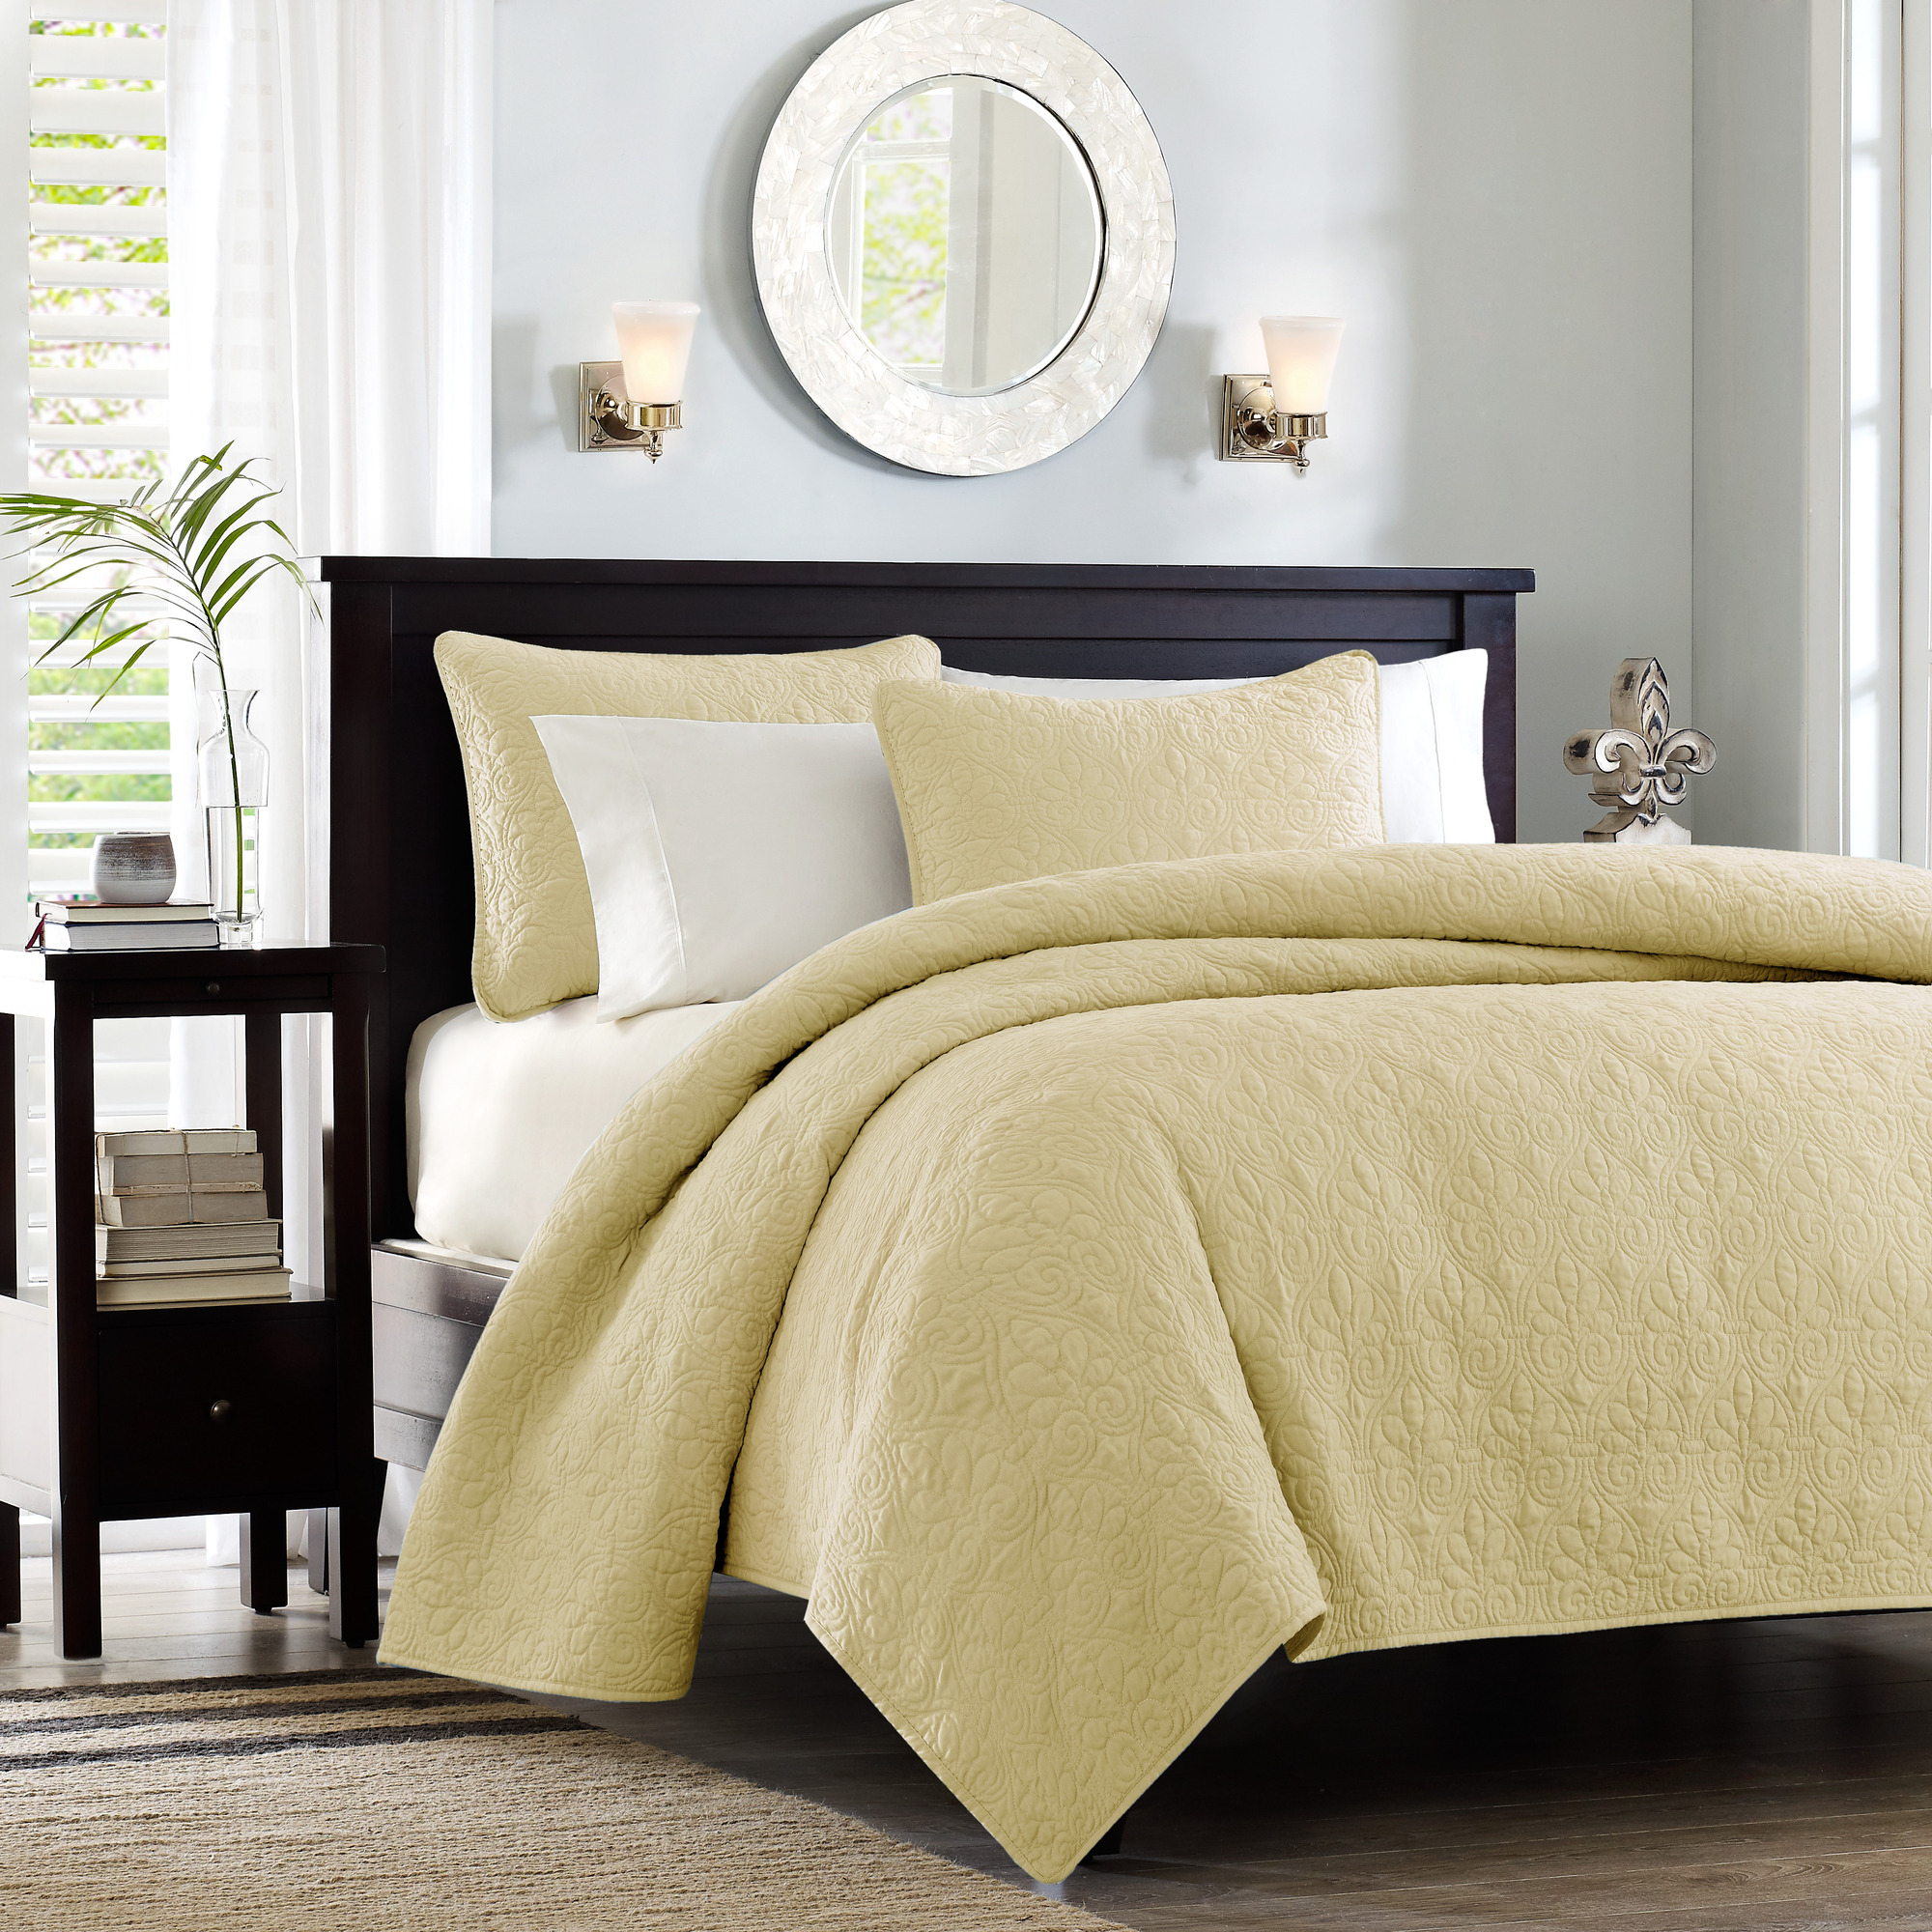 Home Essence Vancouver Super Soft Reversible Coverlet Set, Full/Queen, Yellow - image 1 of 14